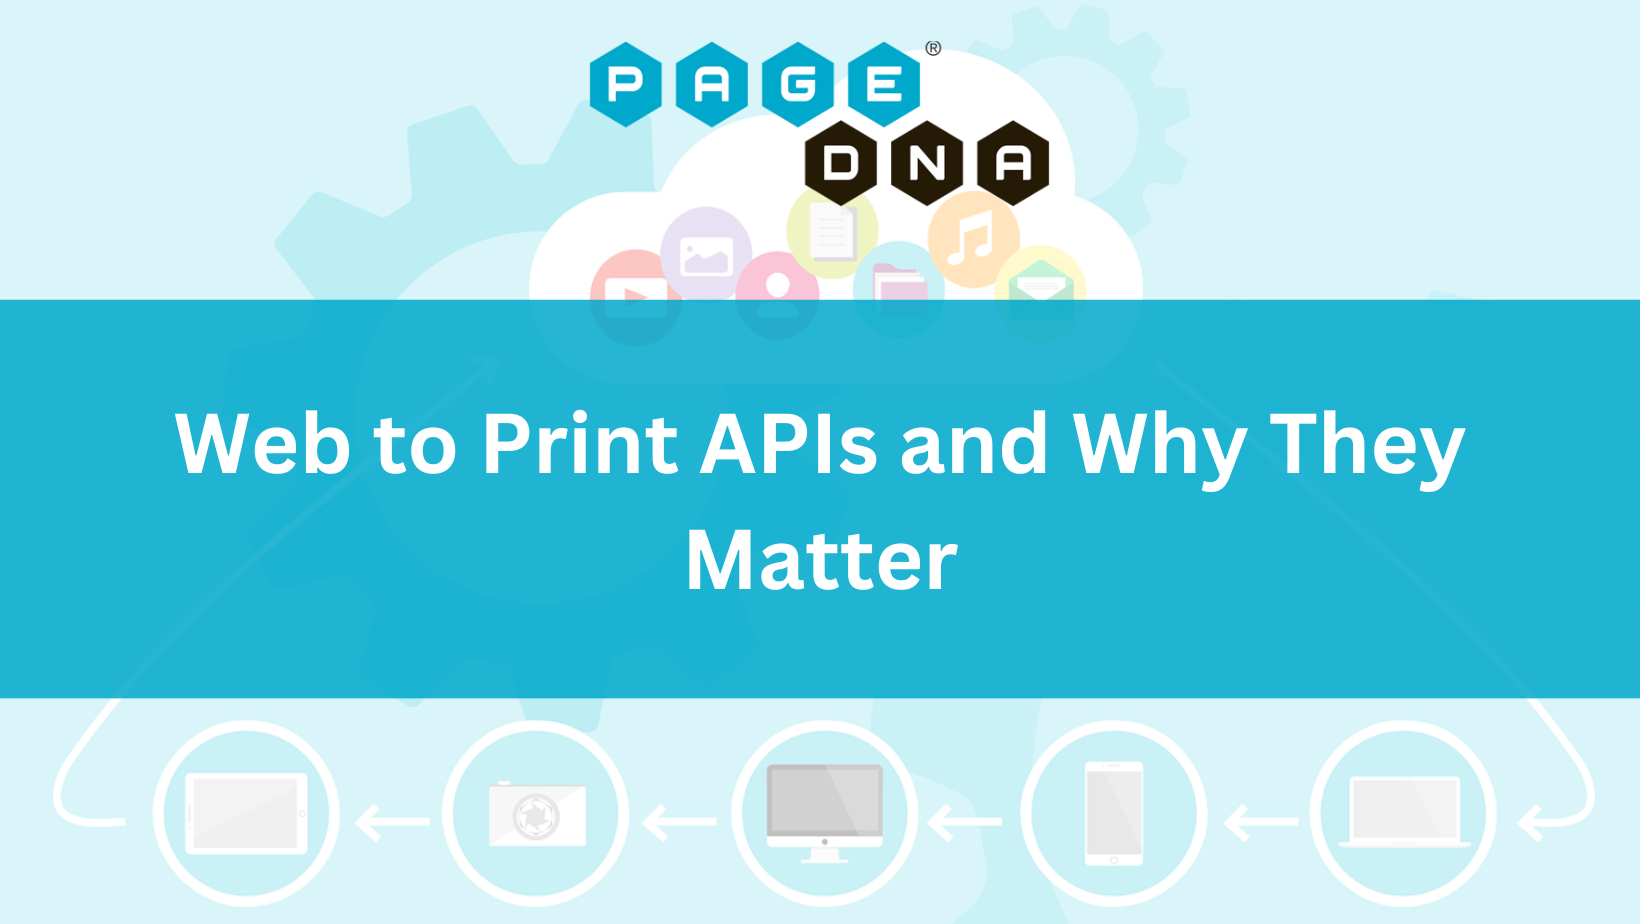 Web to Print APIs and Why They Matter